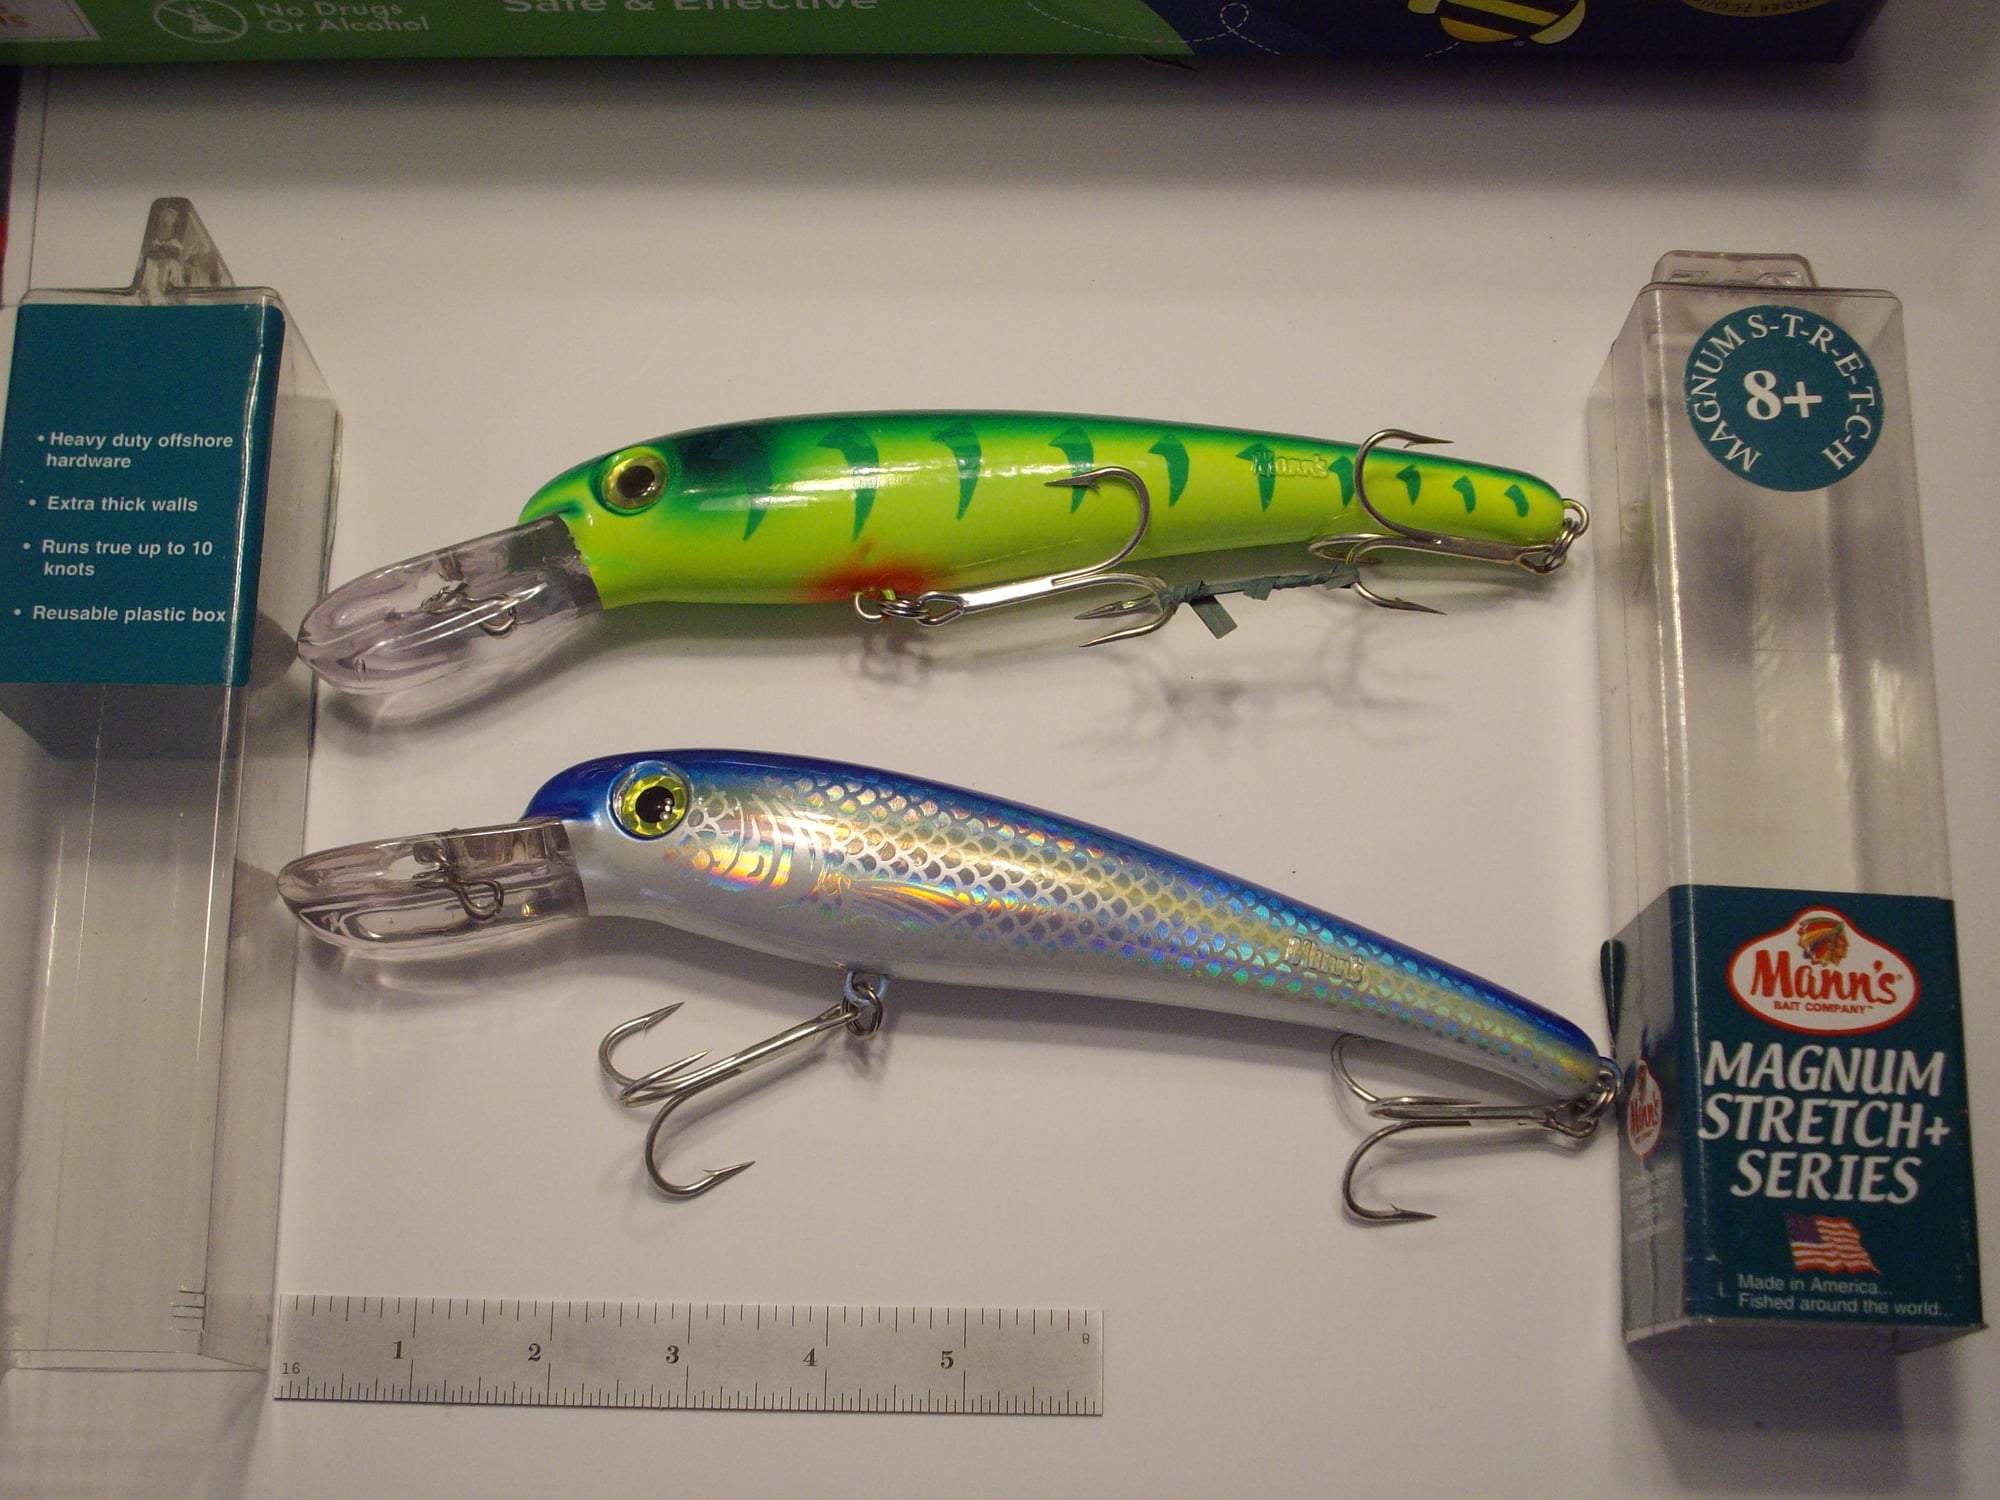 Manns stretch 8's, new, $10.00 - The Hull Truth - Boating and